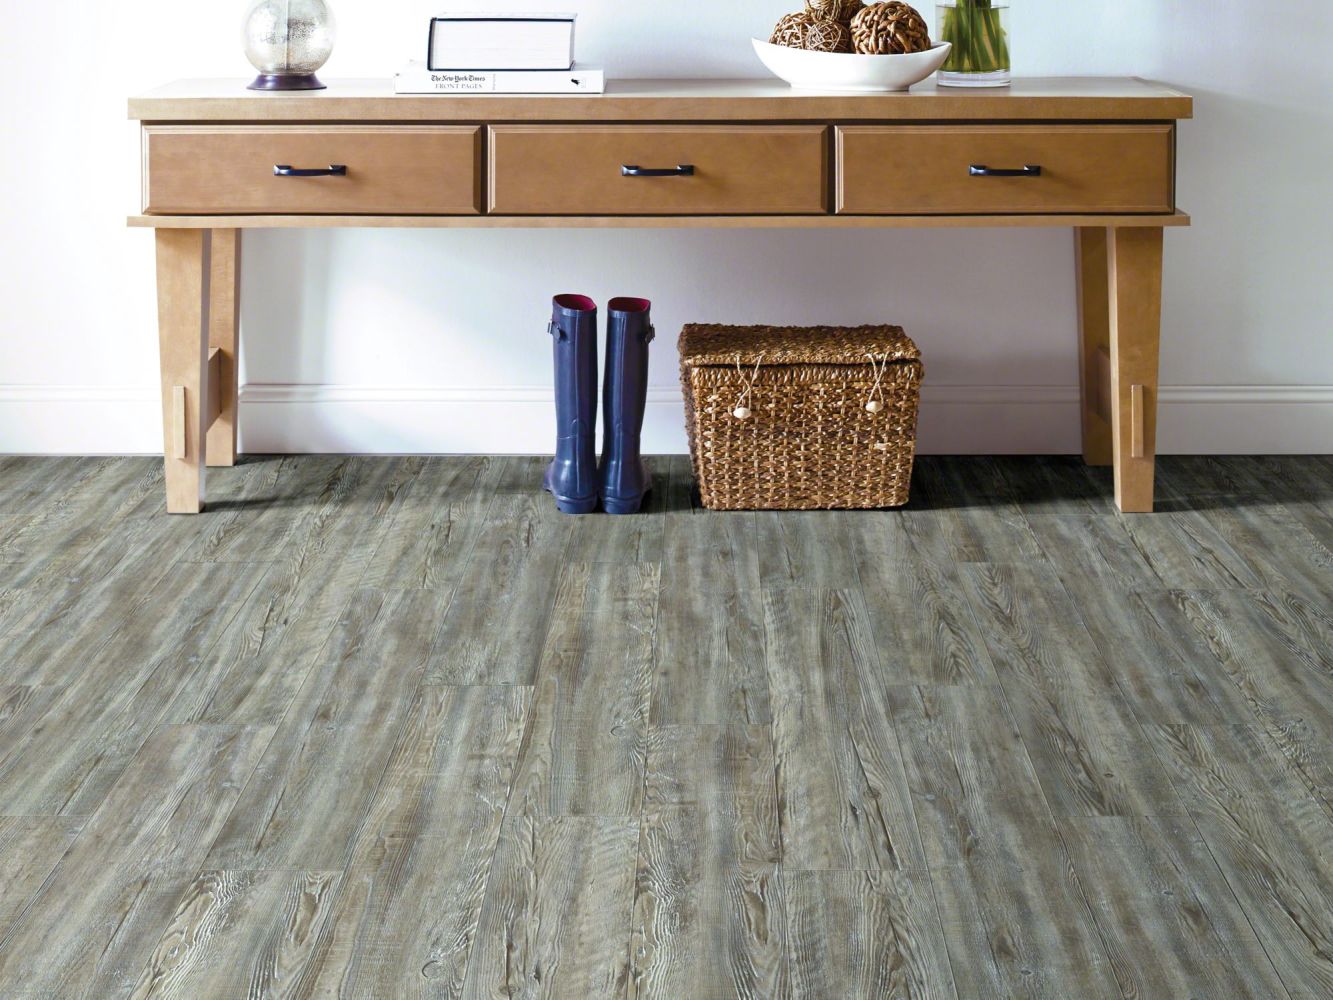 Shaw Floors Resilient Residential Impact Weathered Barnboard 00400_0925V